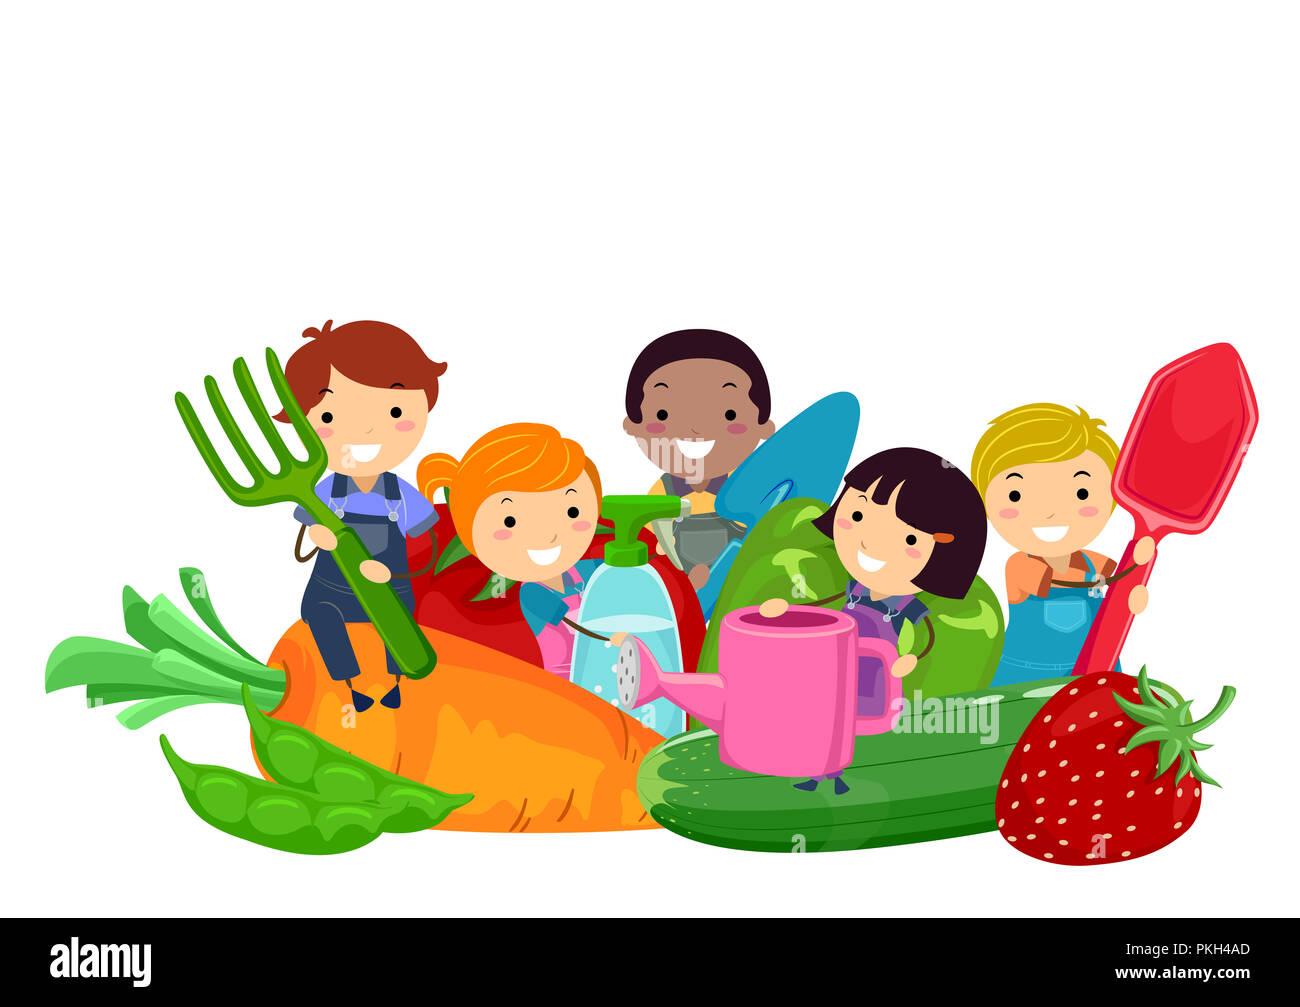 Illustration of Stickman Kids with Garden Tools and Vegetables like Carrots, Strawberry, Cucumber, Tomato, Bell Pepper and Peas Stock Photo